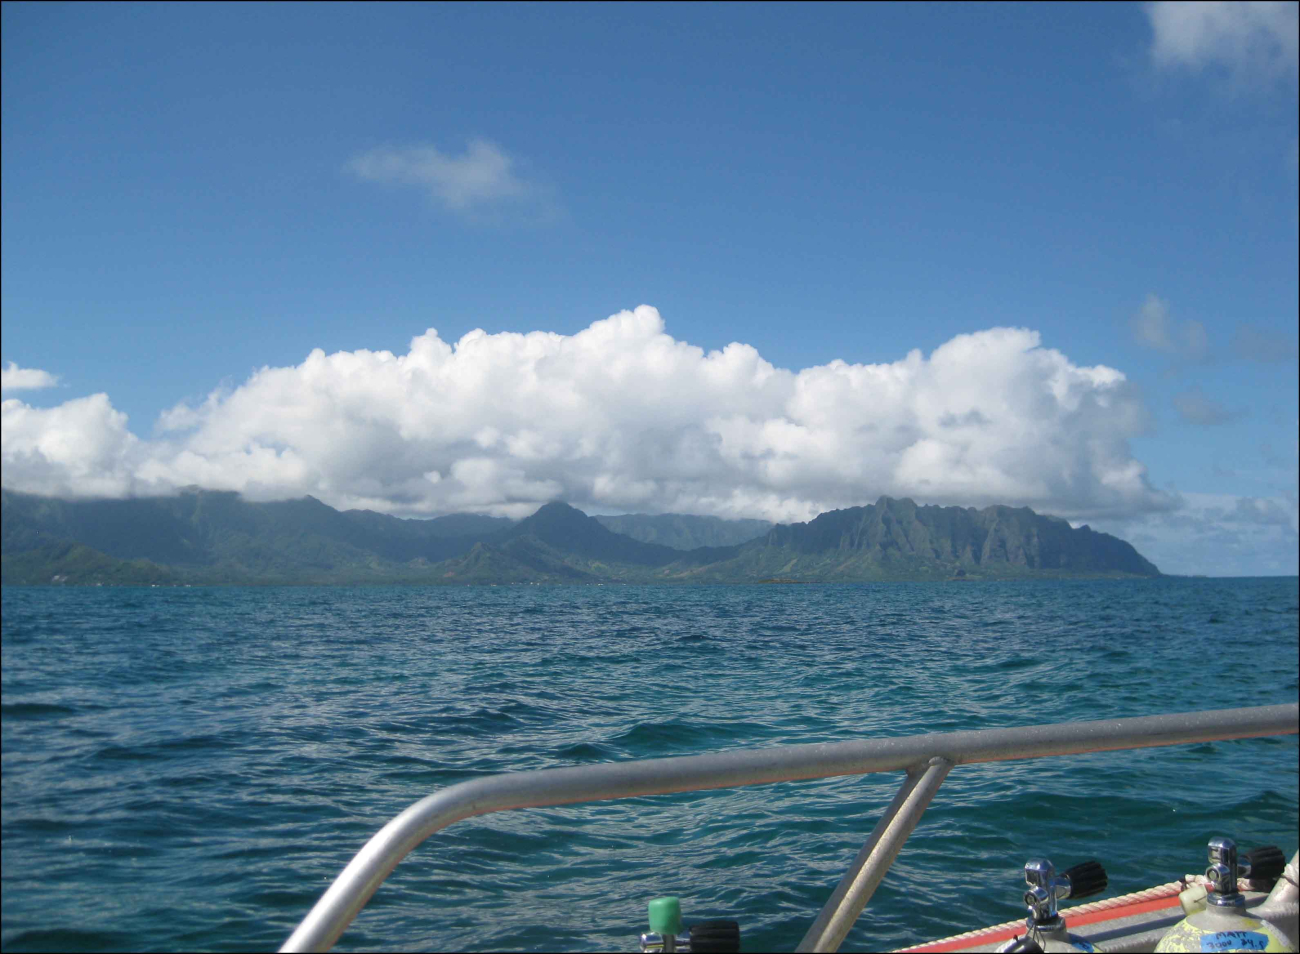 Panoramic view of Kaneohe Bay, on the eastern coast of Oahuas seen from a small boat conducting monitoring surveys of coral reefecosystems